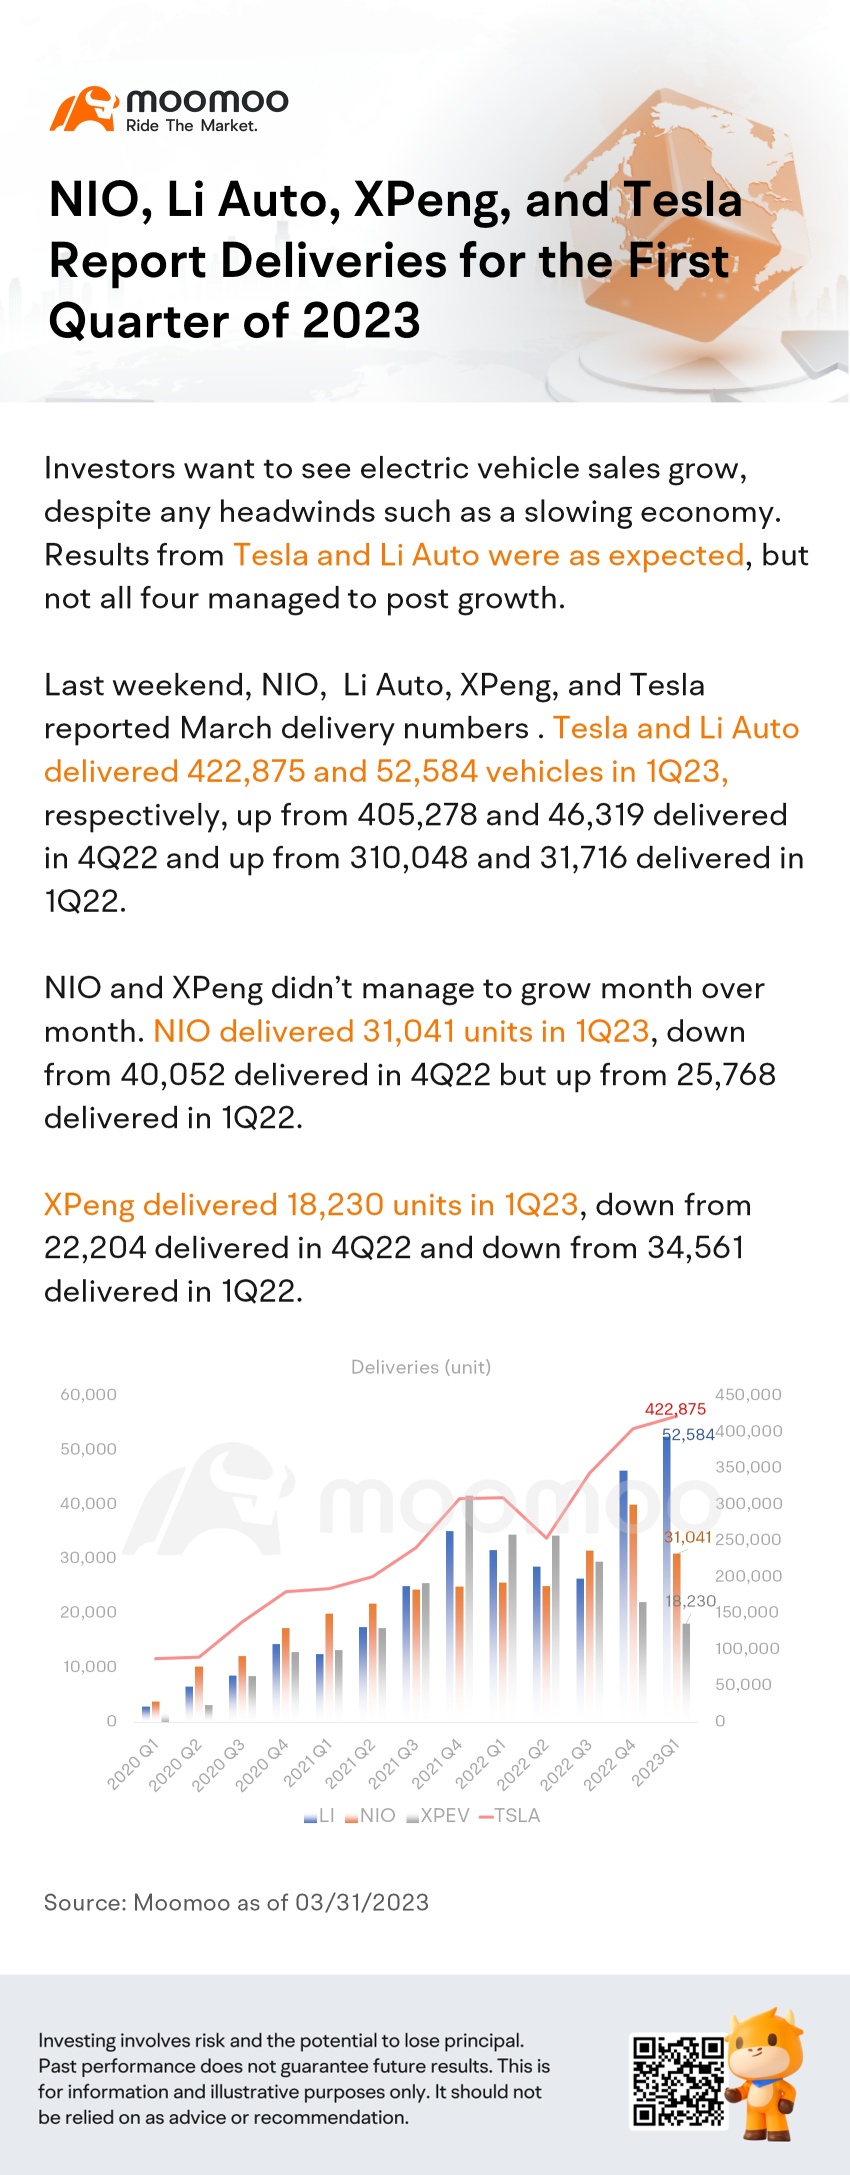 NIO, Li Auto, XPeng, and Tesla Report Deliveries for the First Quarter of 2023